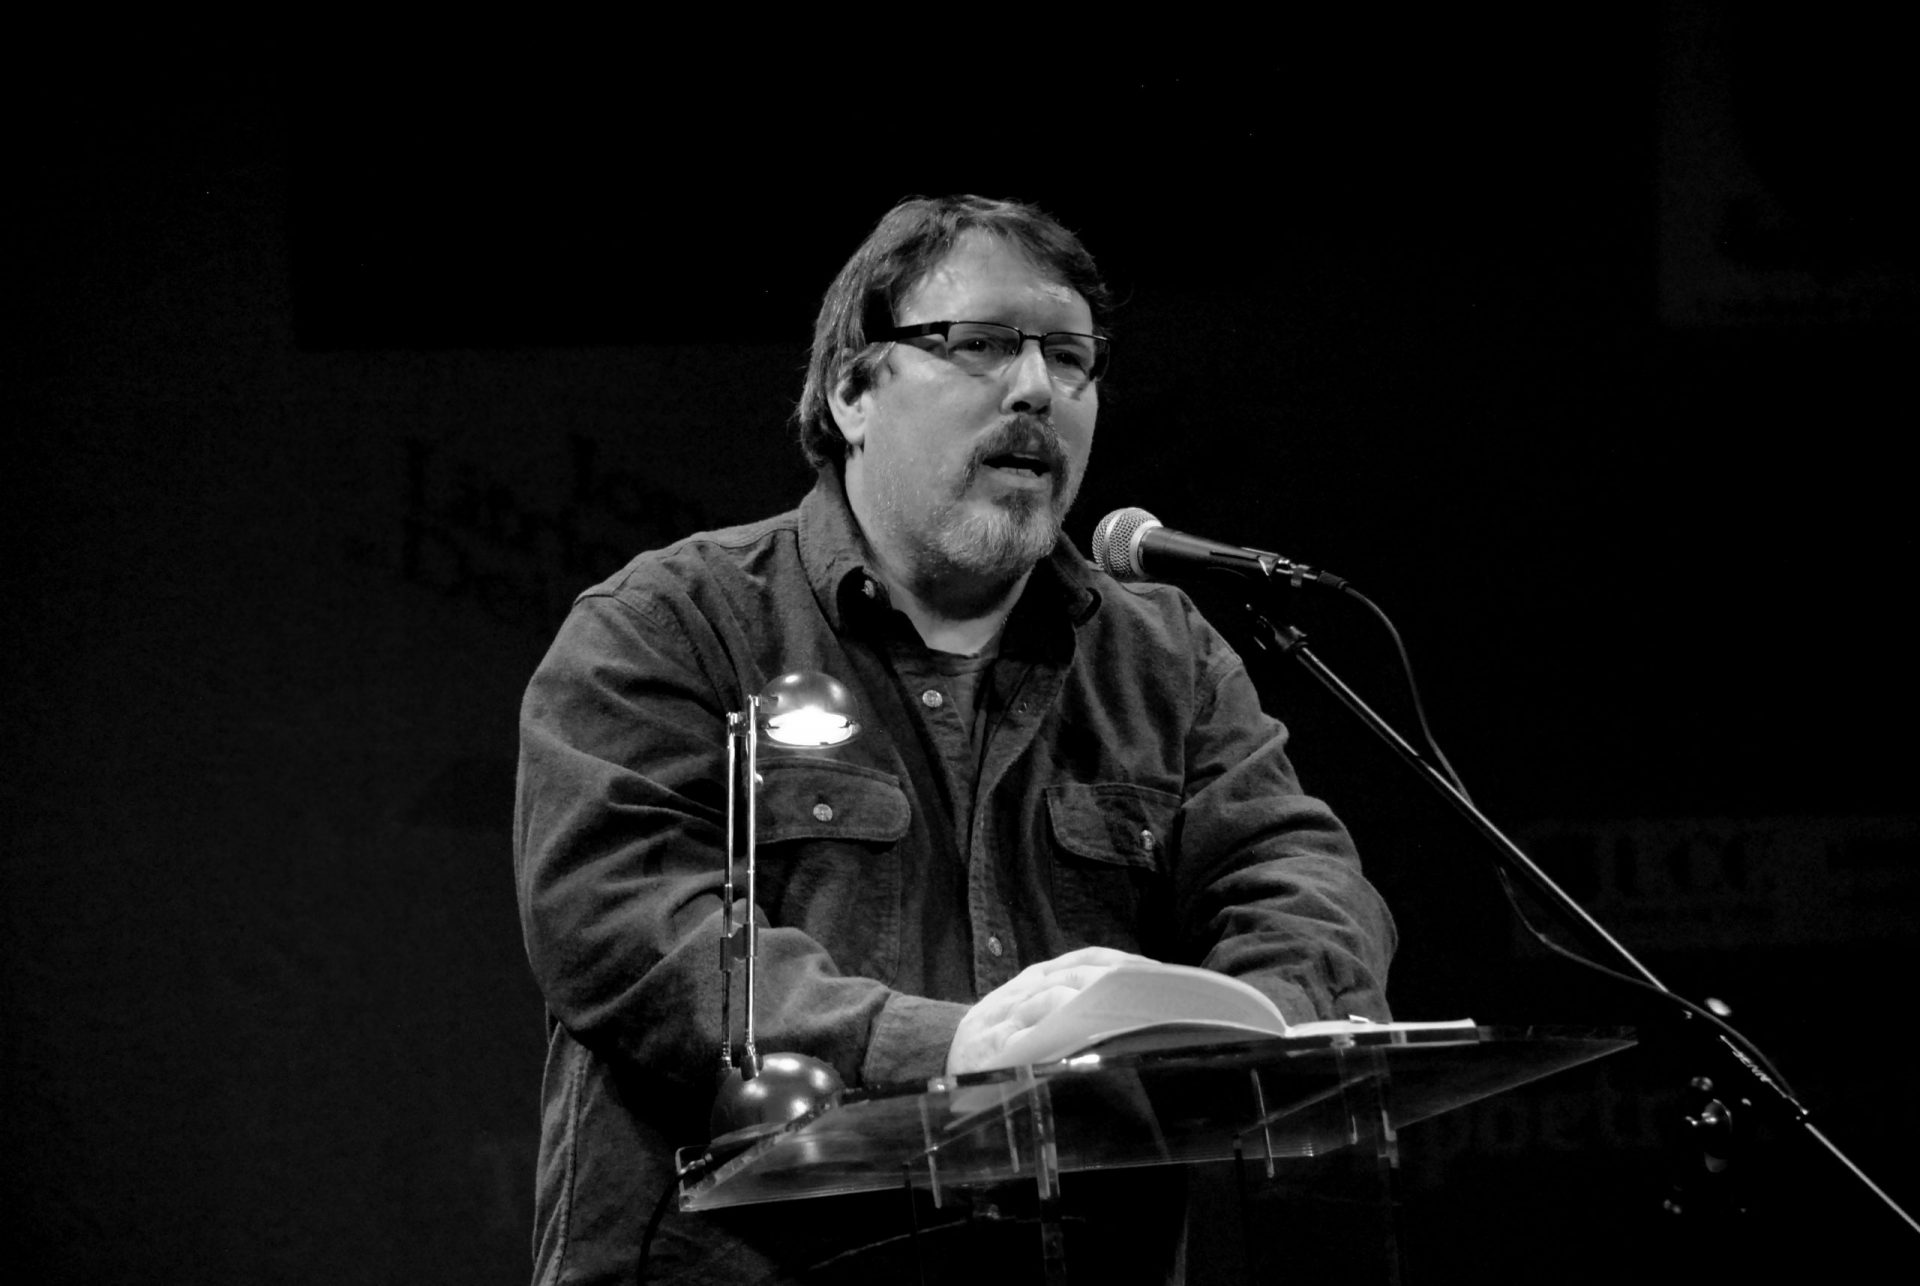 Author Brian Turner reads at a microphone